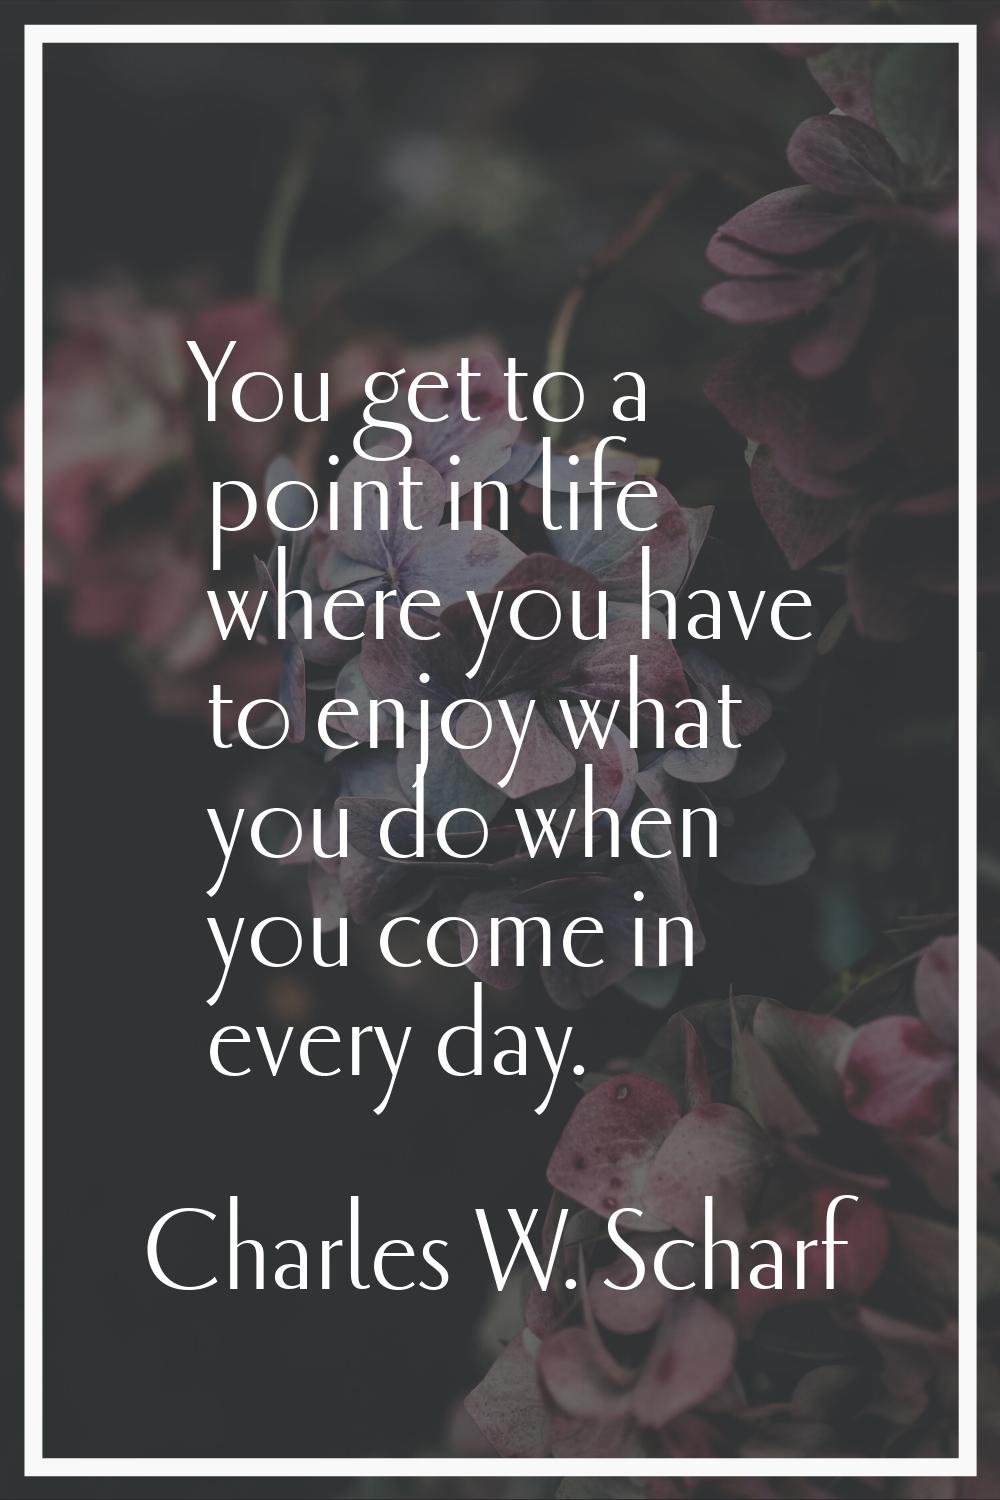 You get to a point in life where you have to enjoy what you do when you come in every day.